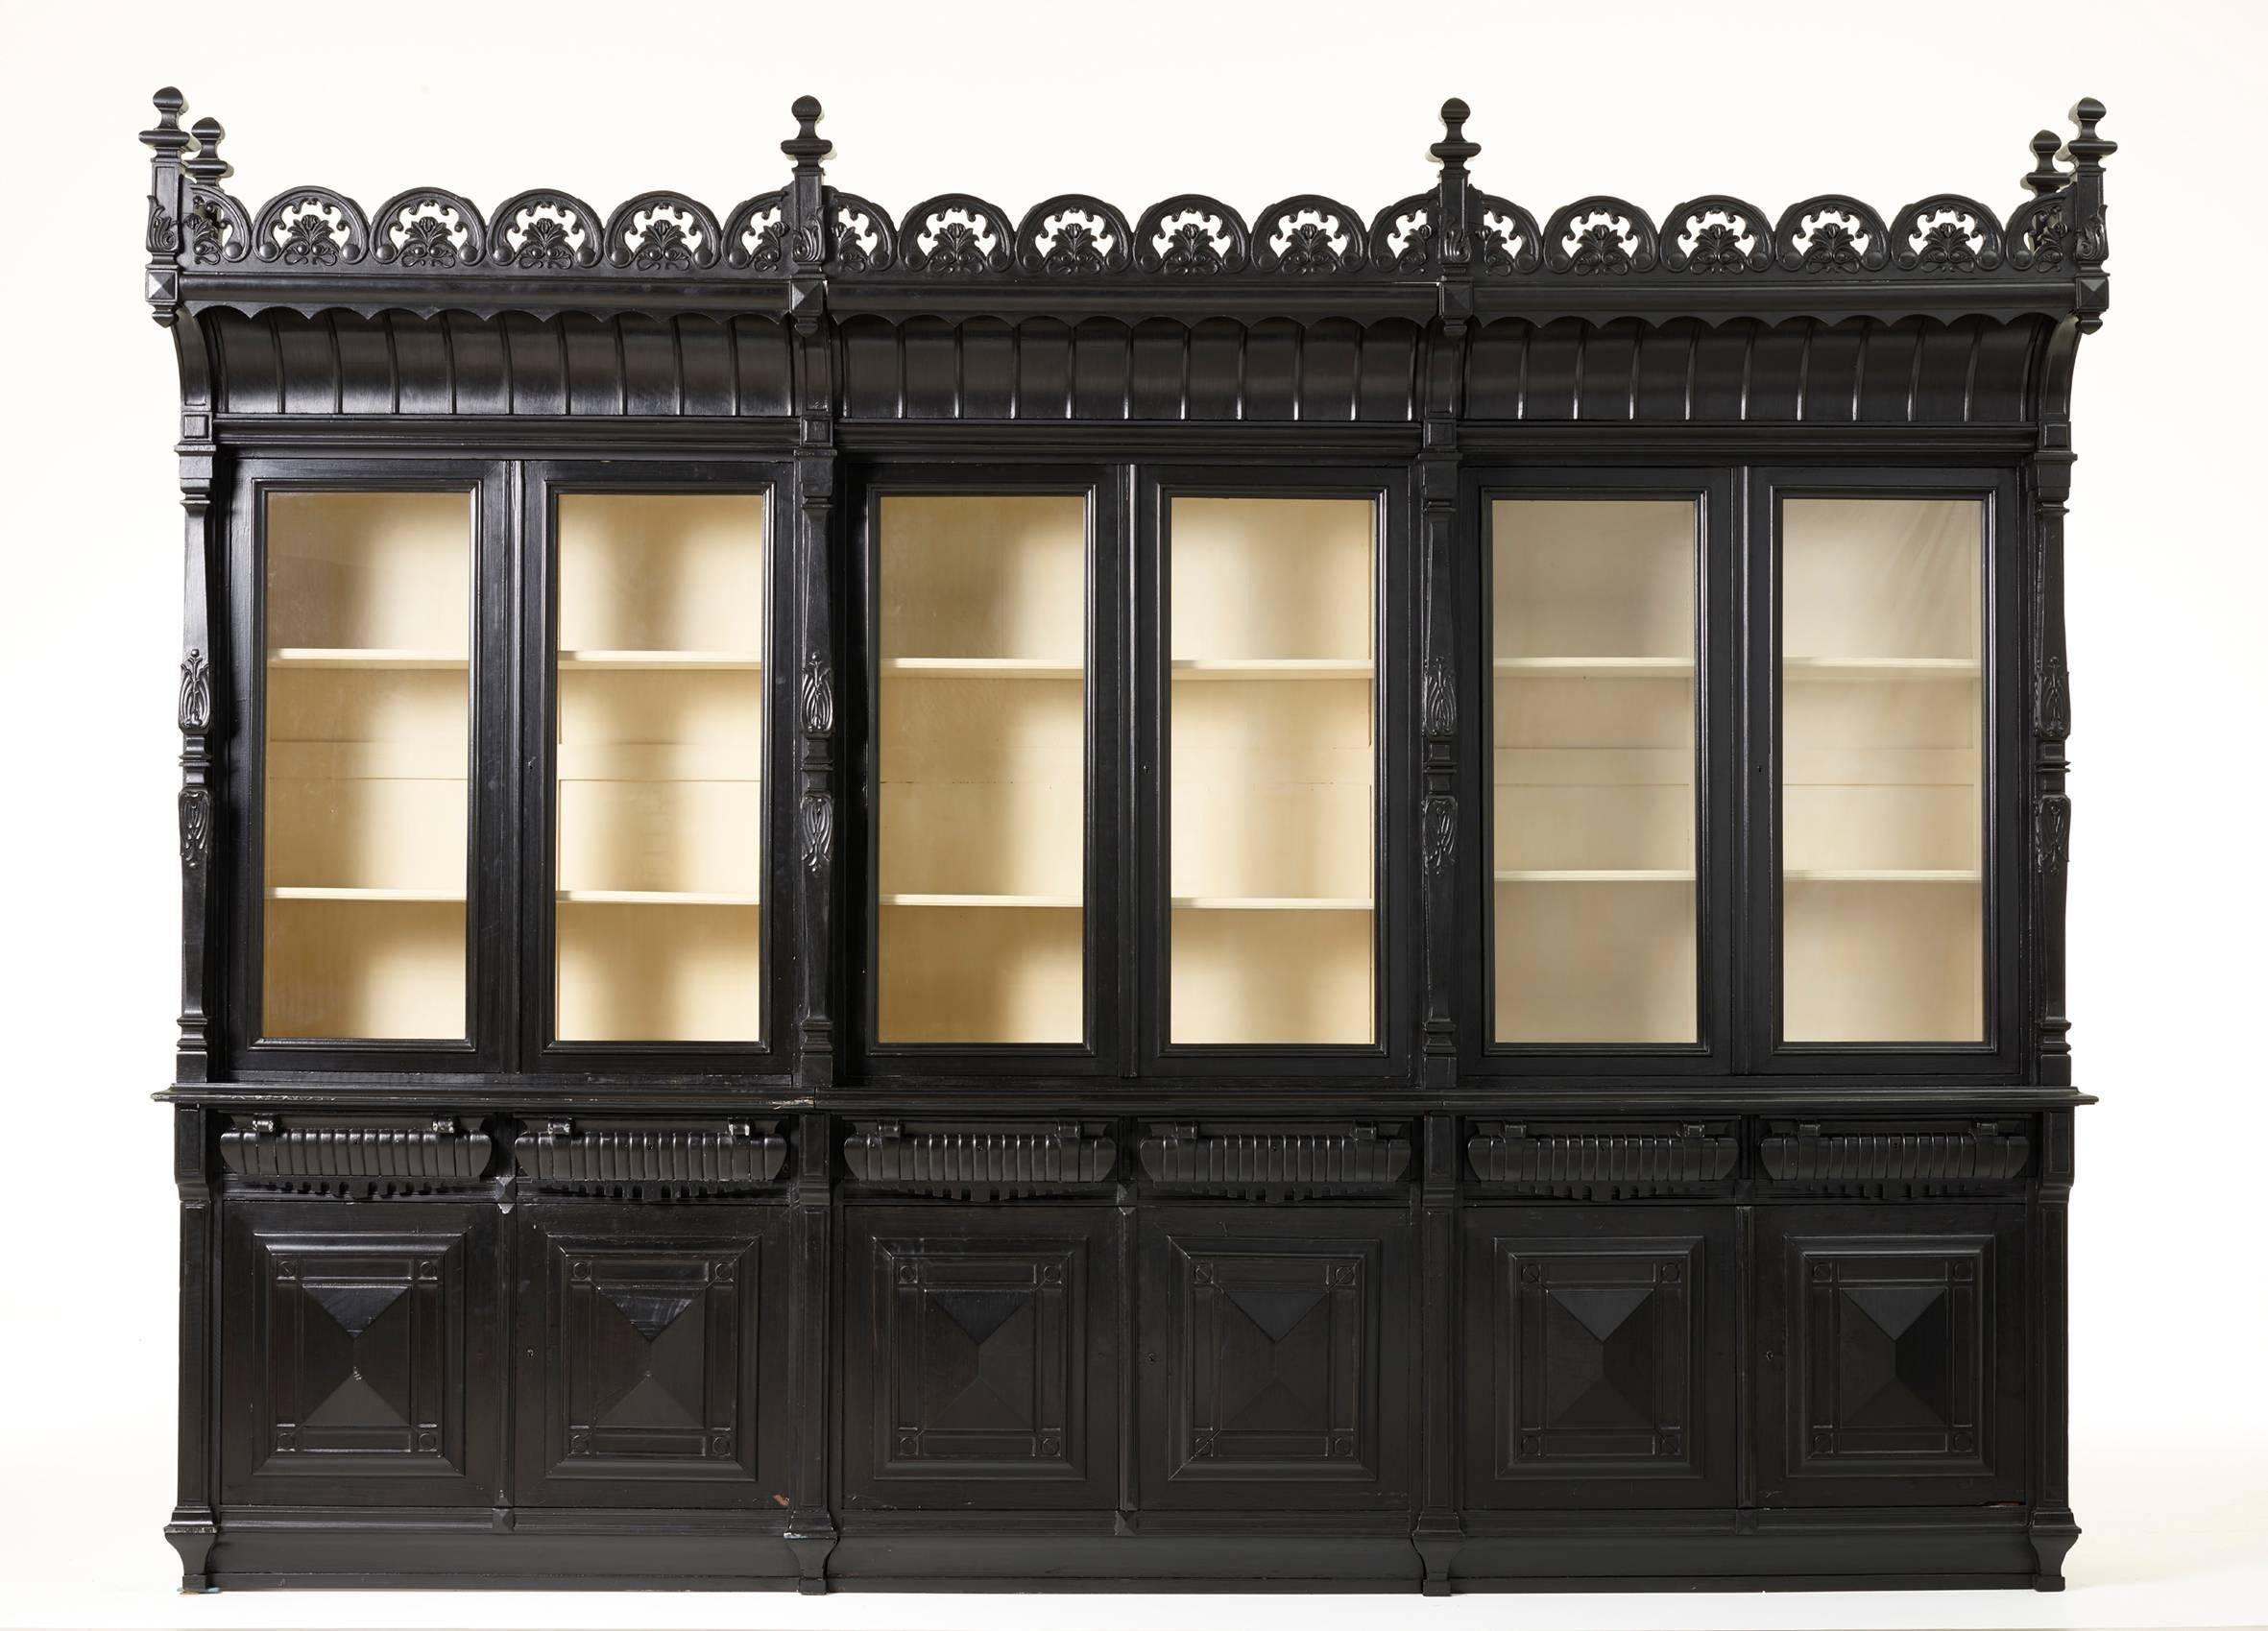 A very large magnificent 19th century monumental Napoleon III bookcase, France circa 1870.
Fully demountable.


Dimensions:

H 295 cm x W 380 x D 53 cm.
H 116.14 in x W 149.61 in x D 20.87 in.
 